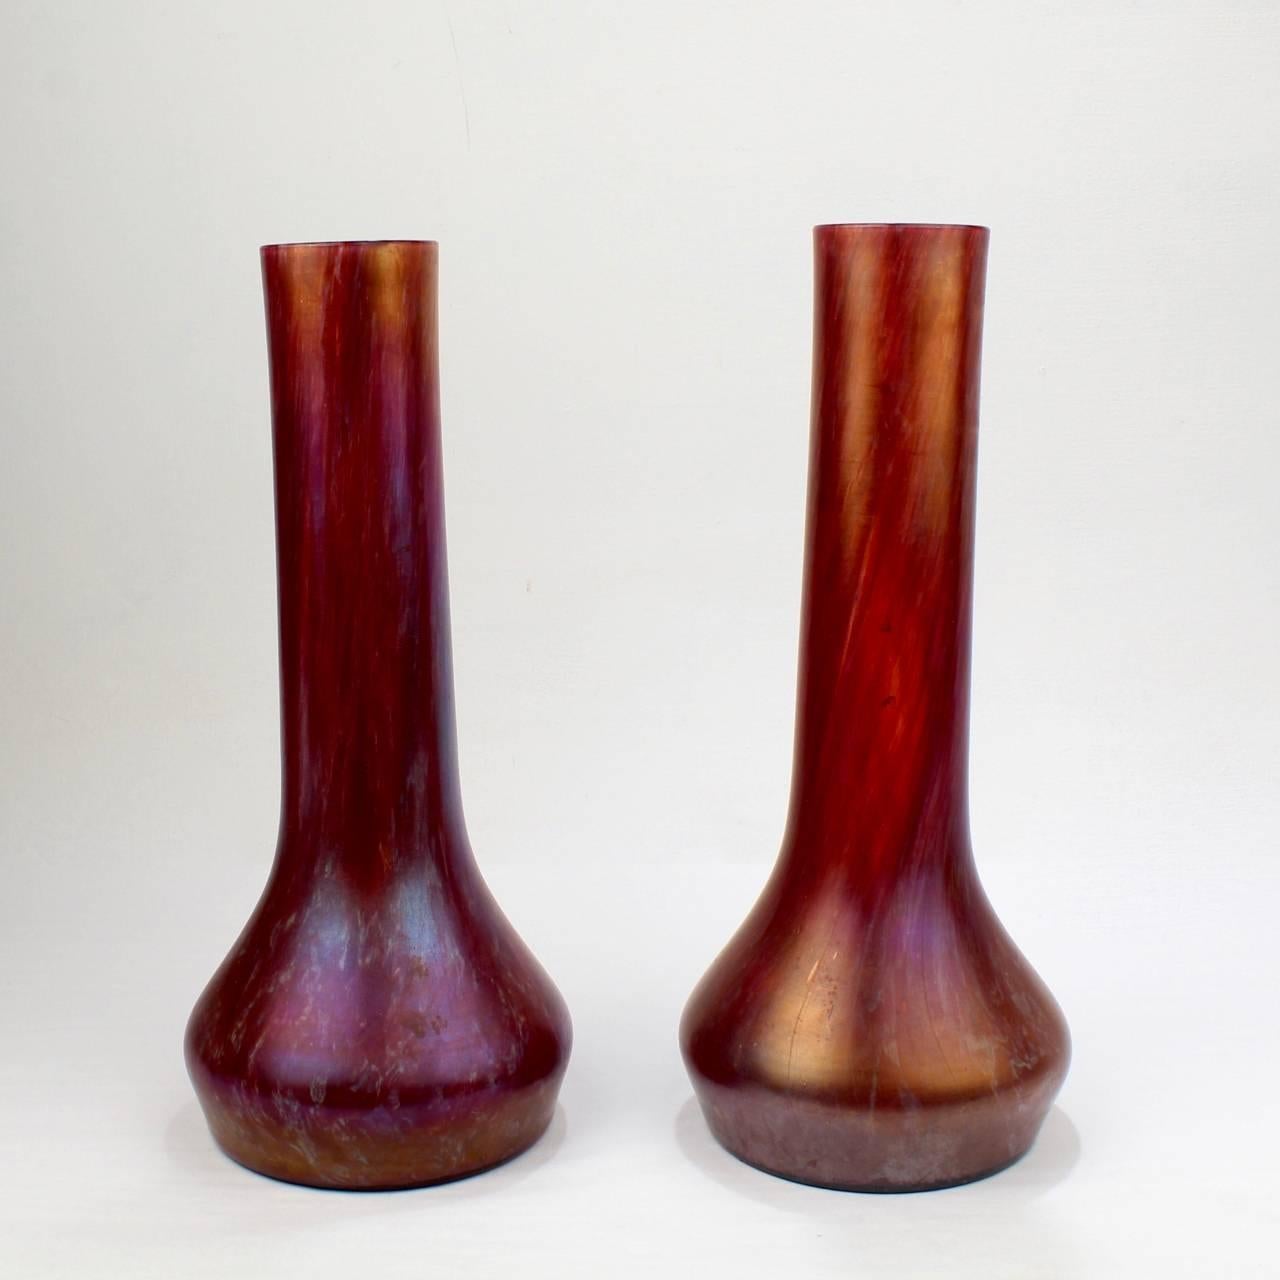 A fine pair of Loetz type Art Nouveau or Jugendstil vases with an internal red oil spot decoration and a lightly iridescent surfaces. 

Attributed to the Czech glass manufacturer Josef Rindskopf and Sons. 

Height: ca. 12 in.

Items purchased